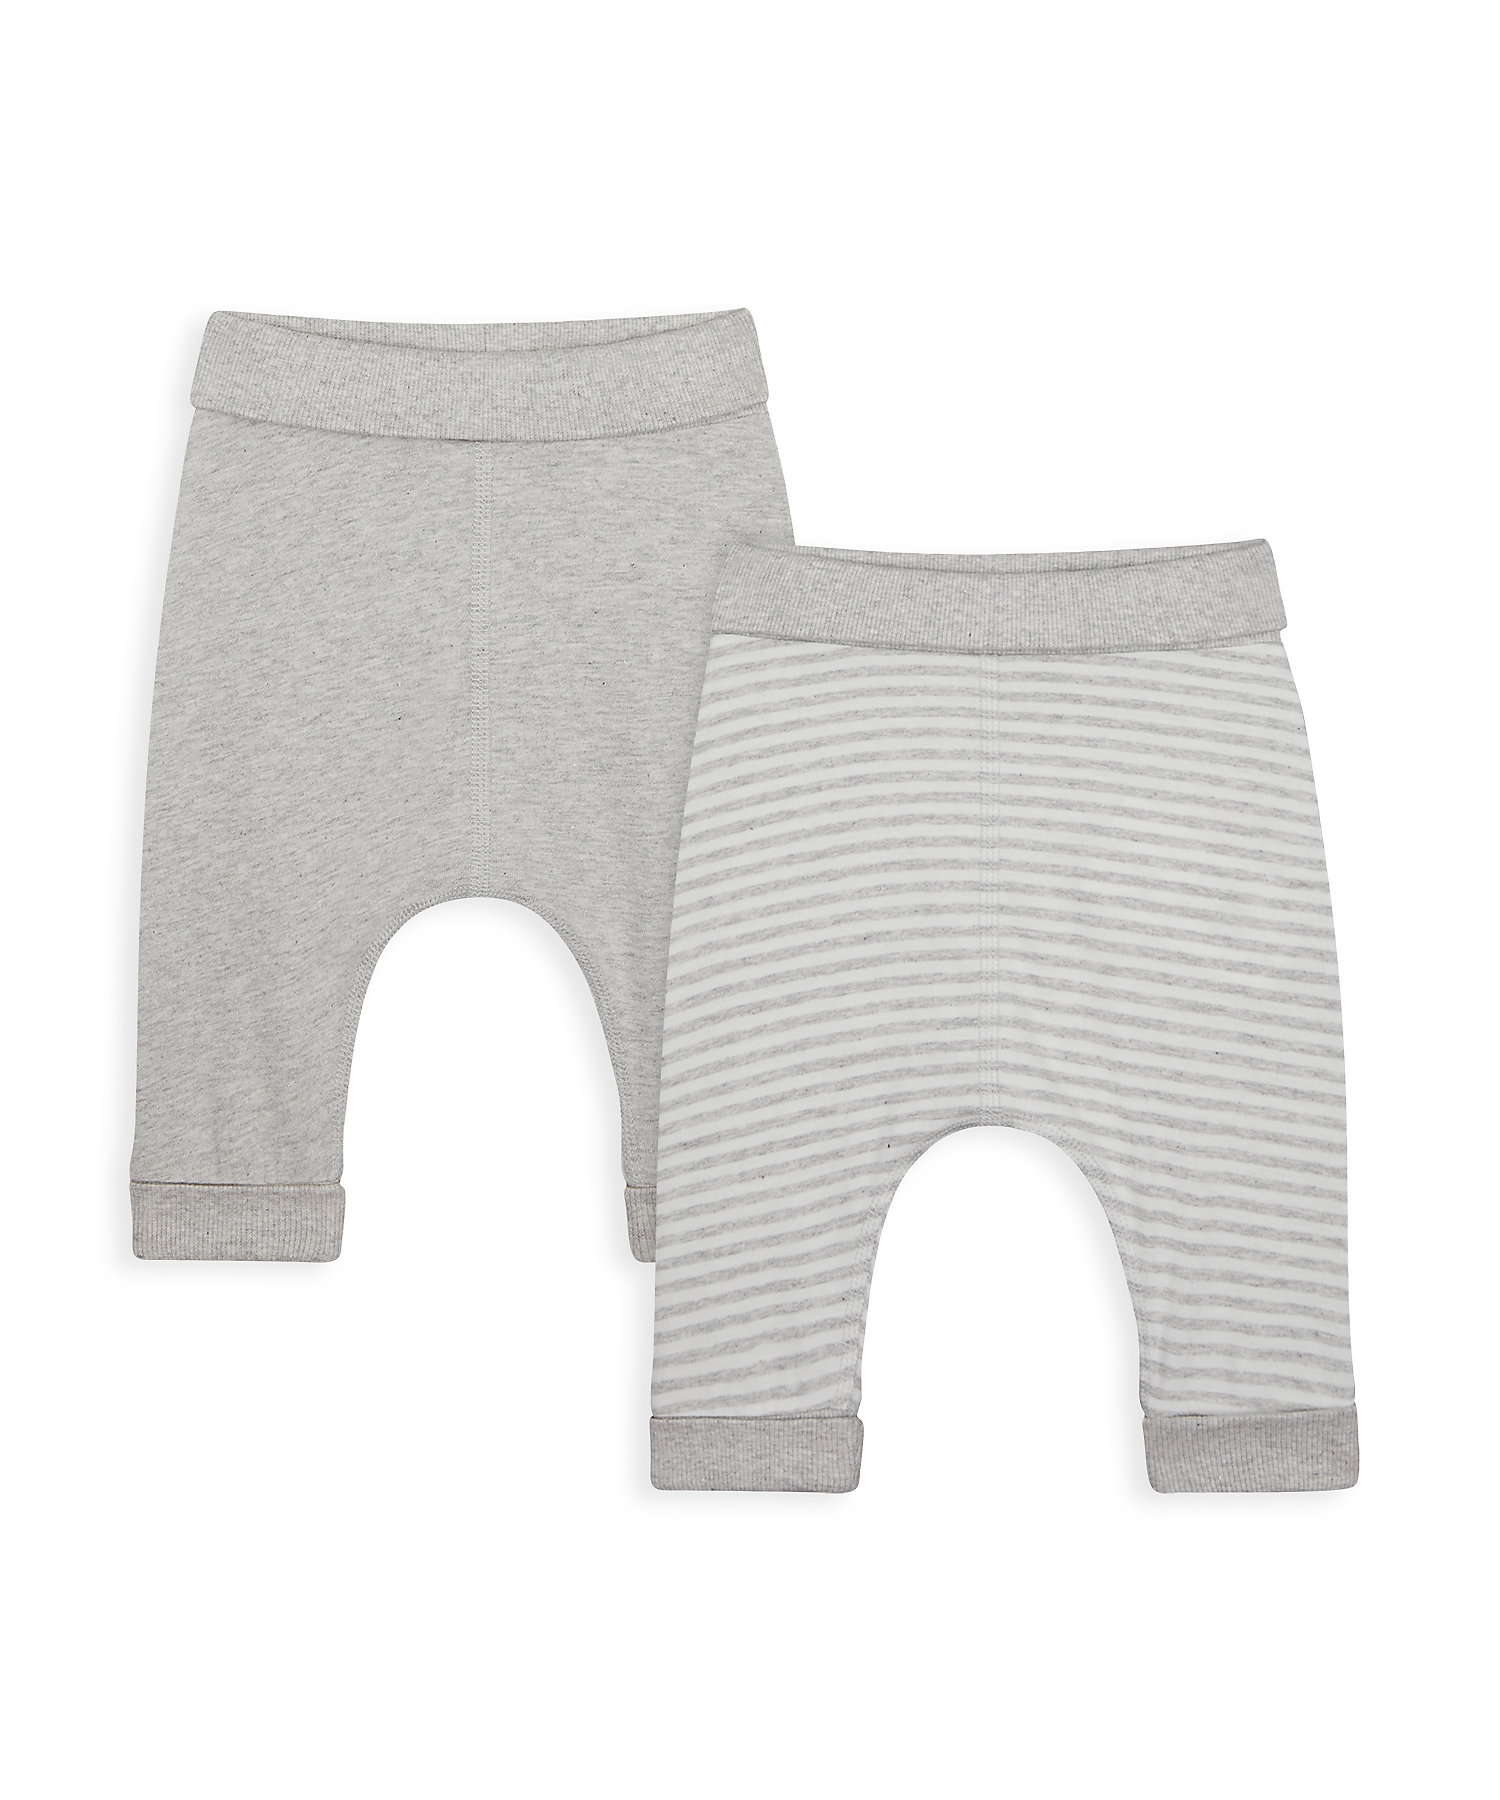 Mothercare | Unisex Joggers Striped - Pack Of 2 - Grey